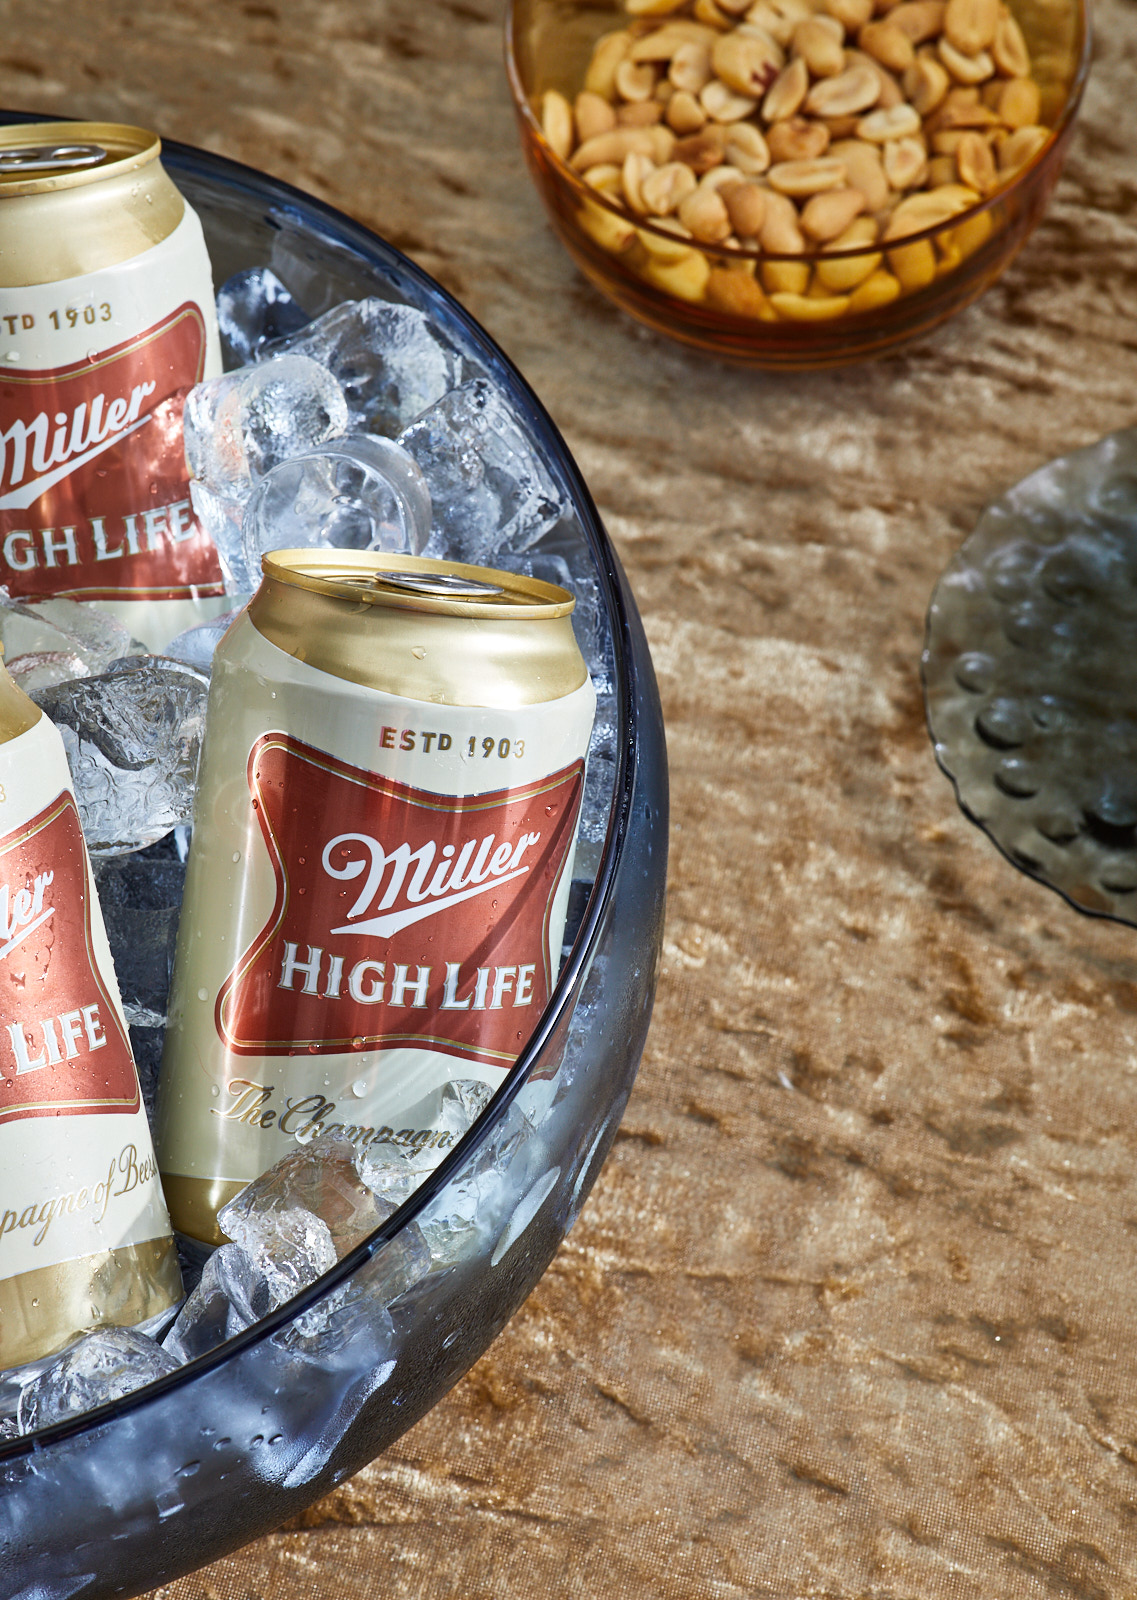 Miller High Life beer cans in blue bowl